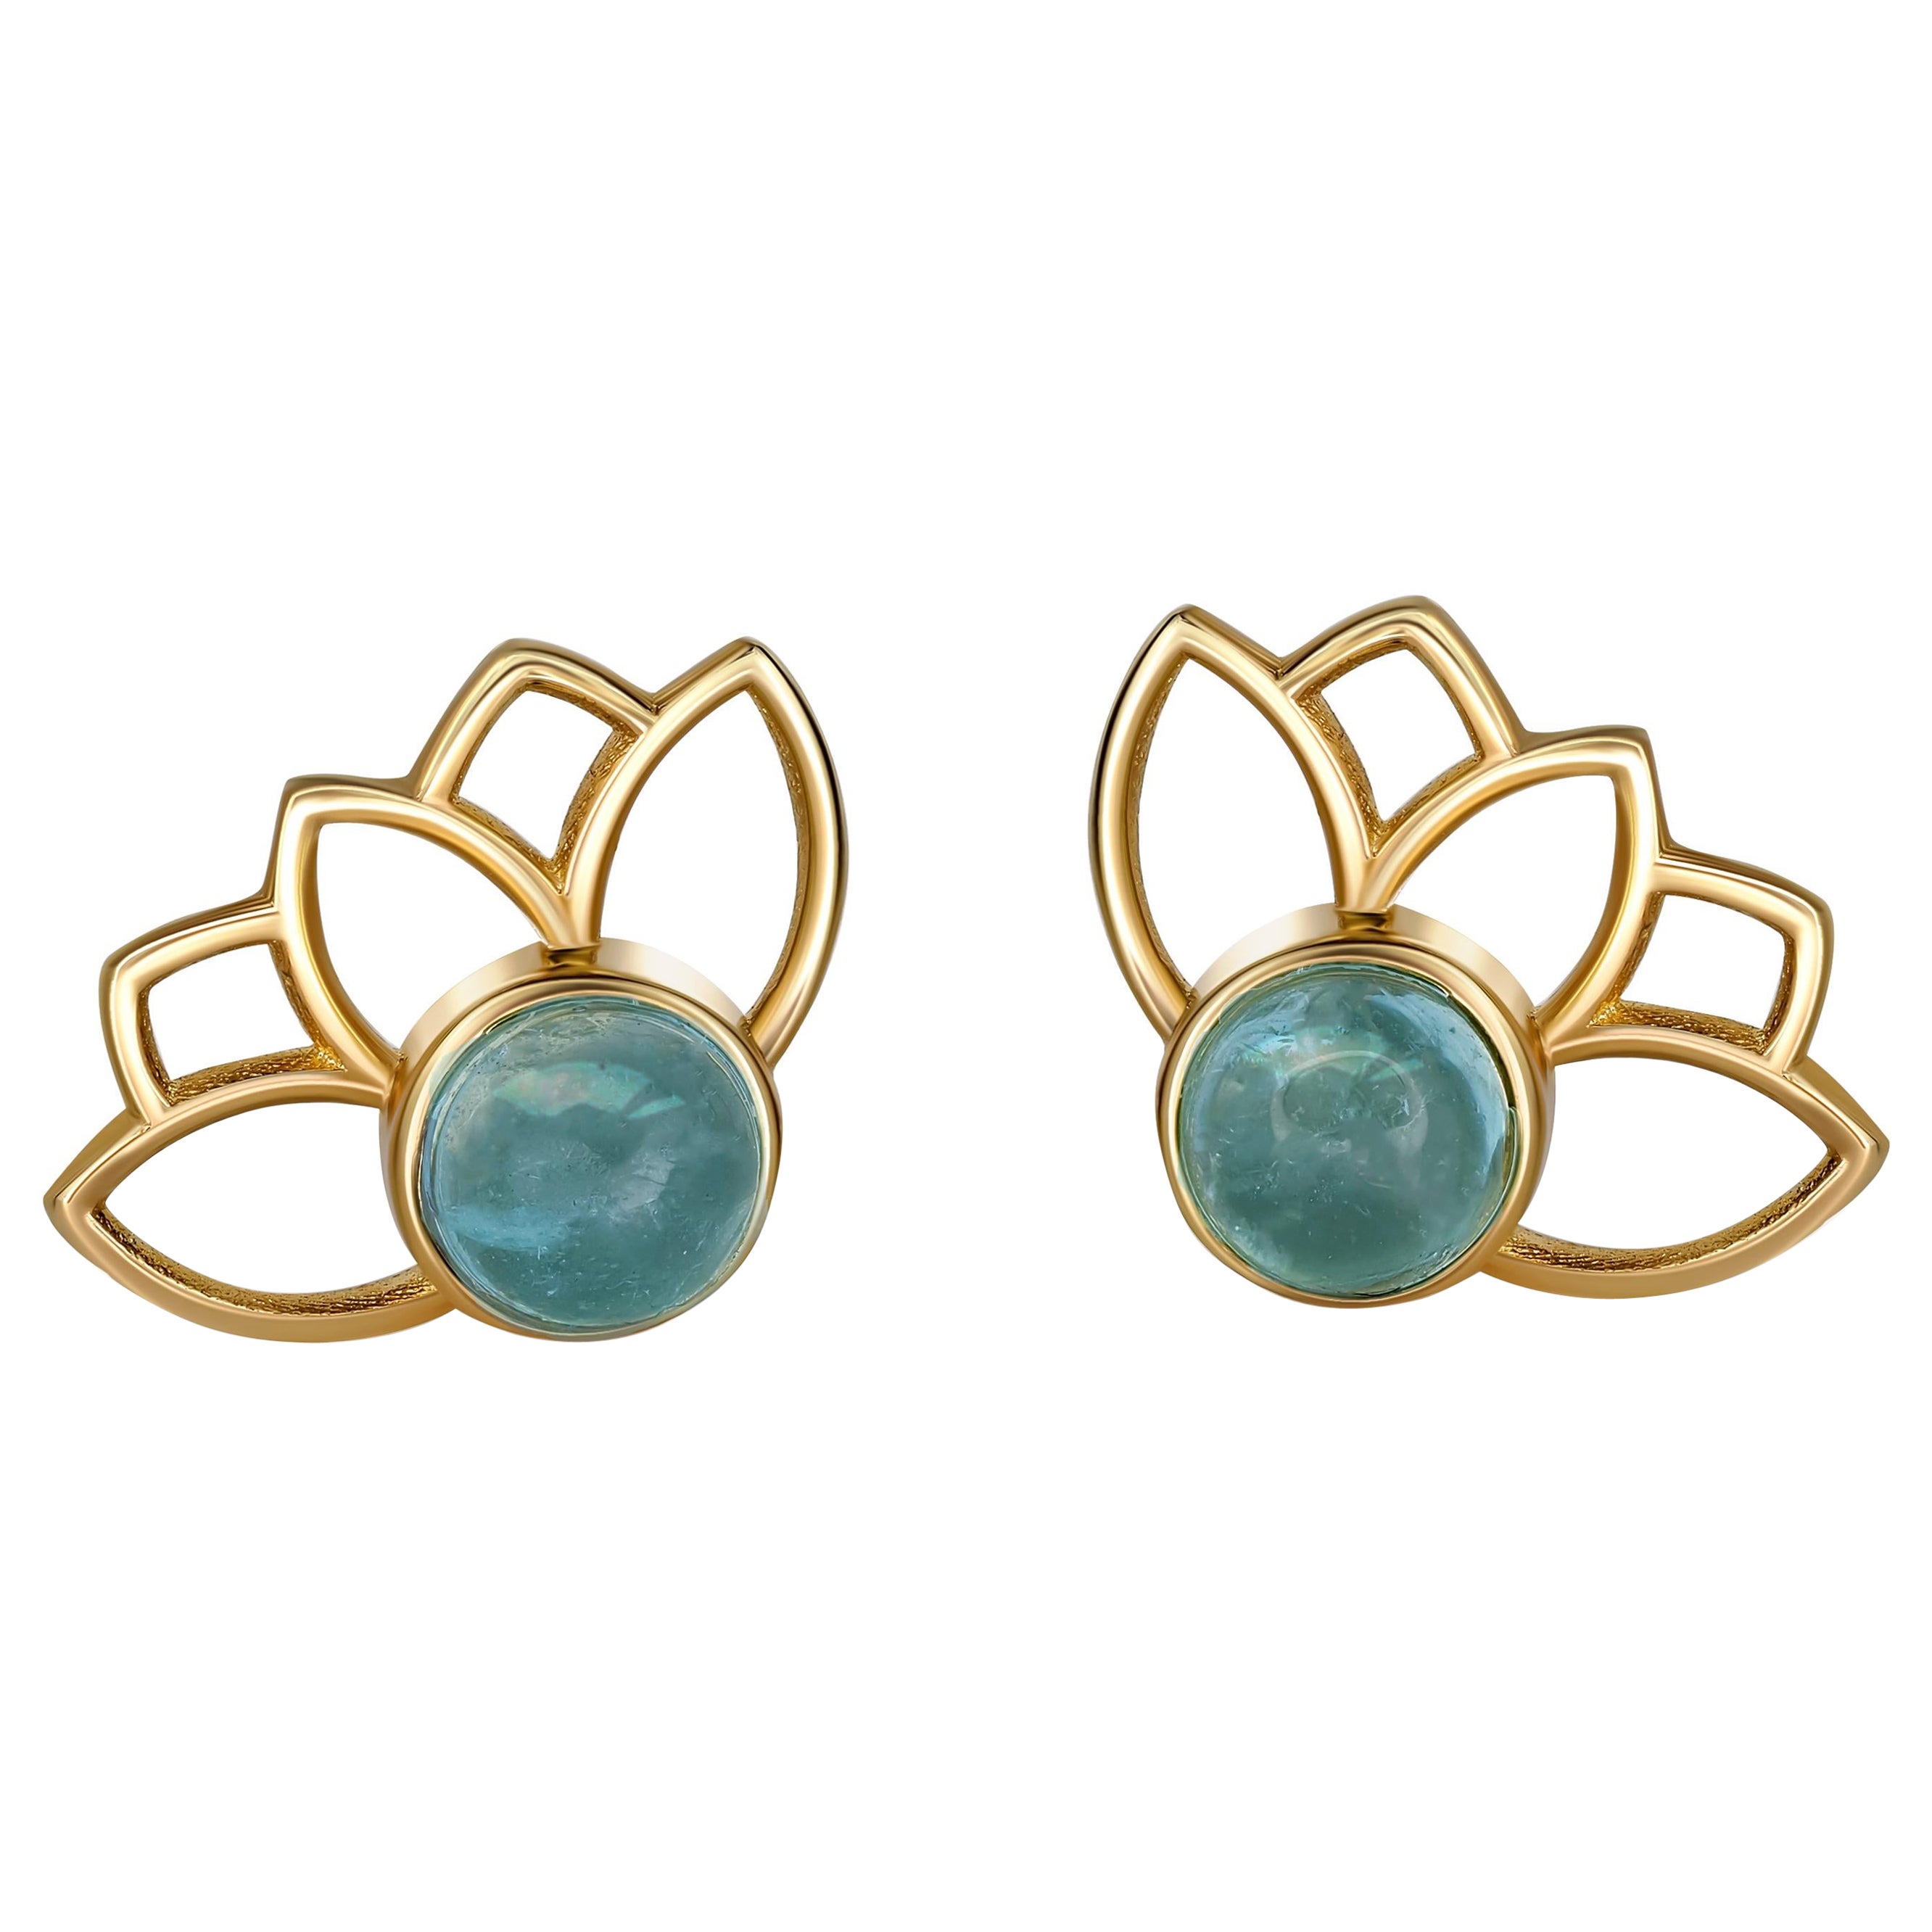 Lotus Earrings Studs with Aquamarines in 14k Gold